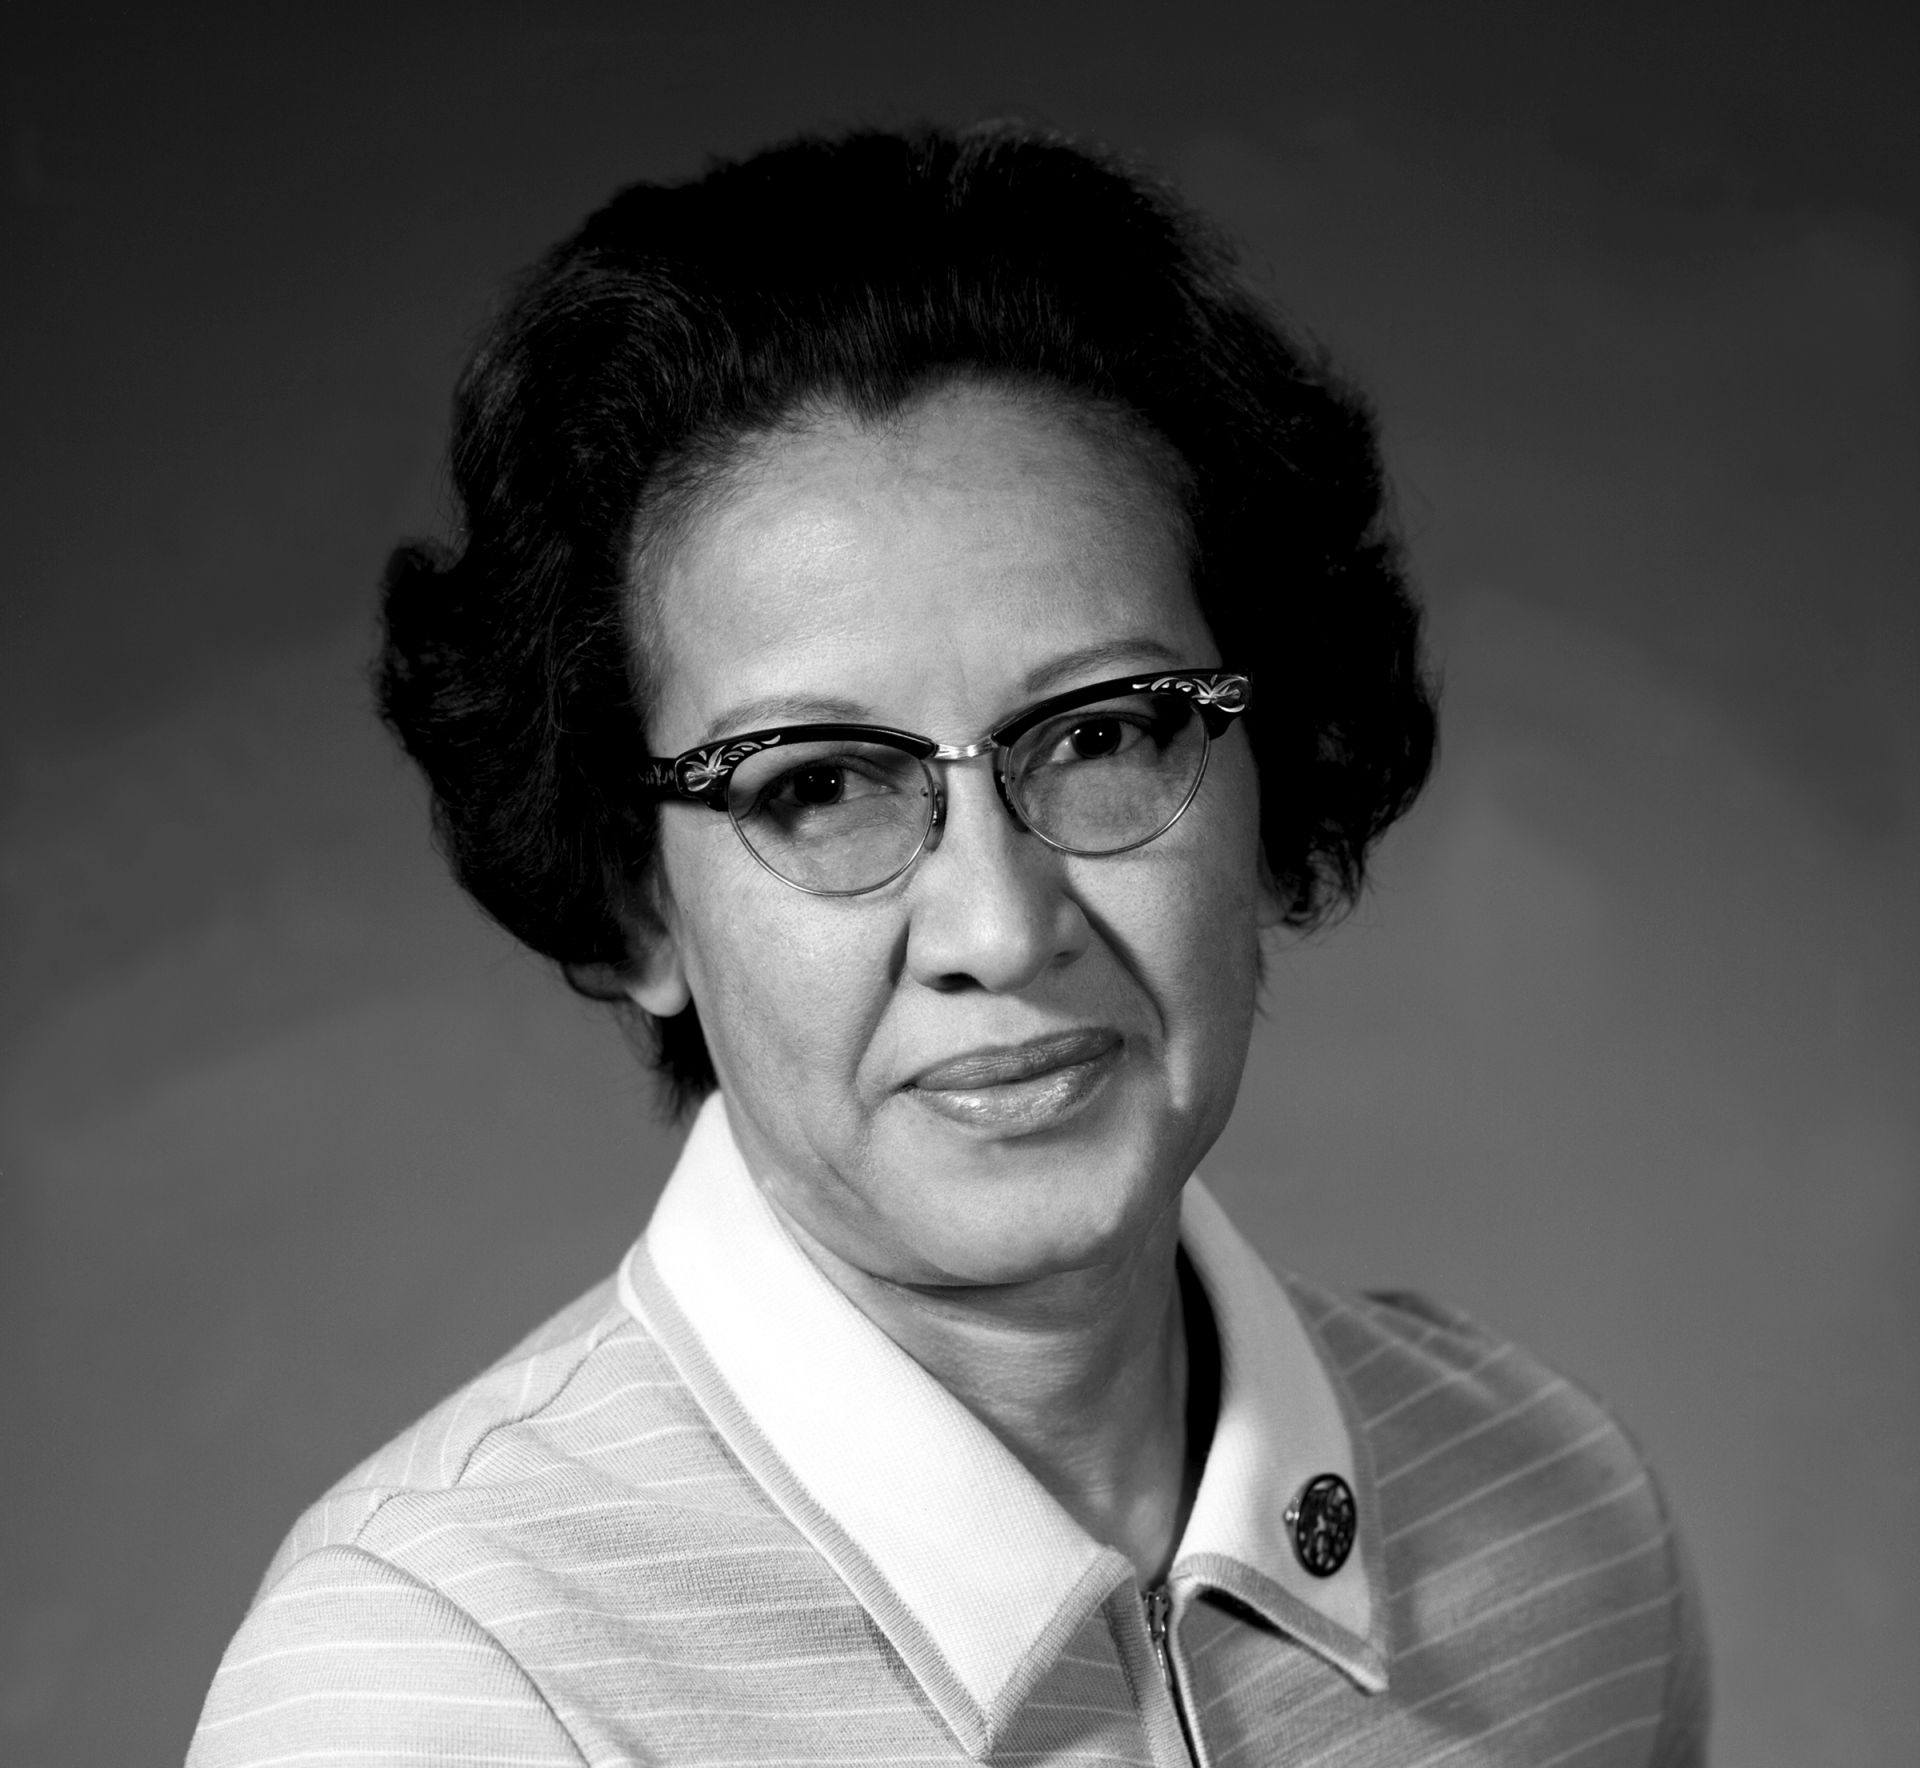 epa08244298 A undated handout photo made available by NASA on 24 February 2020, showing NASA research mathematician Katherine Johnson. Katherine Johnson contributed to various NASA projects, including calculating the trajectory of Alan Shepard's flight in 1961, the first American in space. Johnson according to NASA also 'verified the calculations made by early electronic computers of John Glenn's 1962 launch to orbit and the 1969 Apollo 11 trajectory to the moon'. Reports on 24 February 2020 state Katherine Johnson has died aged 101.  EPA/NASA  HANDOUT EDITORIAL USE ONLY/NO SALES